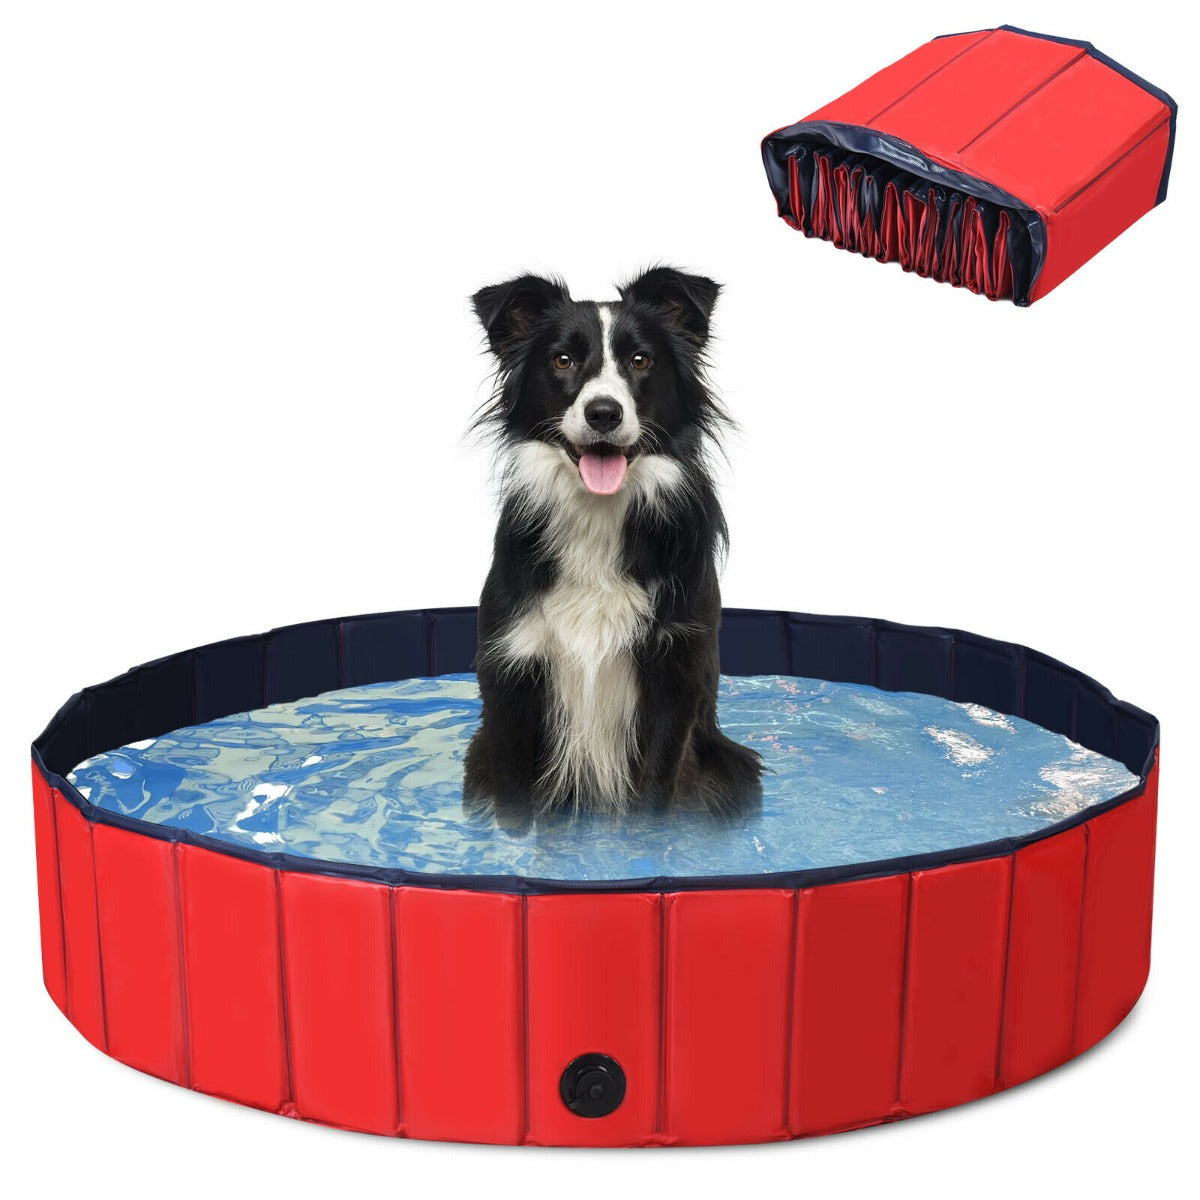 140cm Large Collapsible Dog Pool with Anti slip Bottom Red